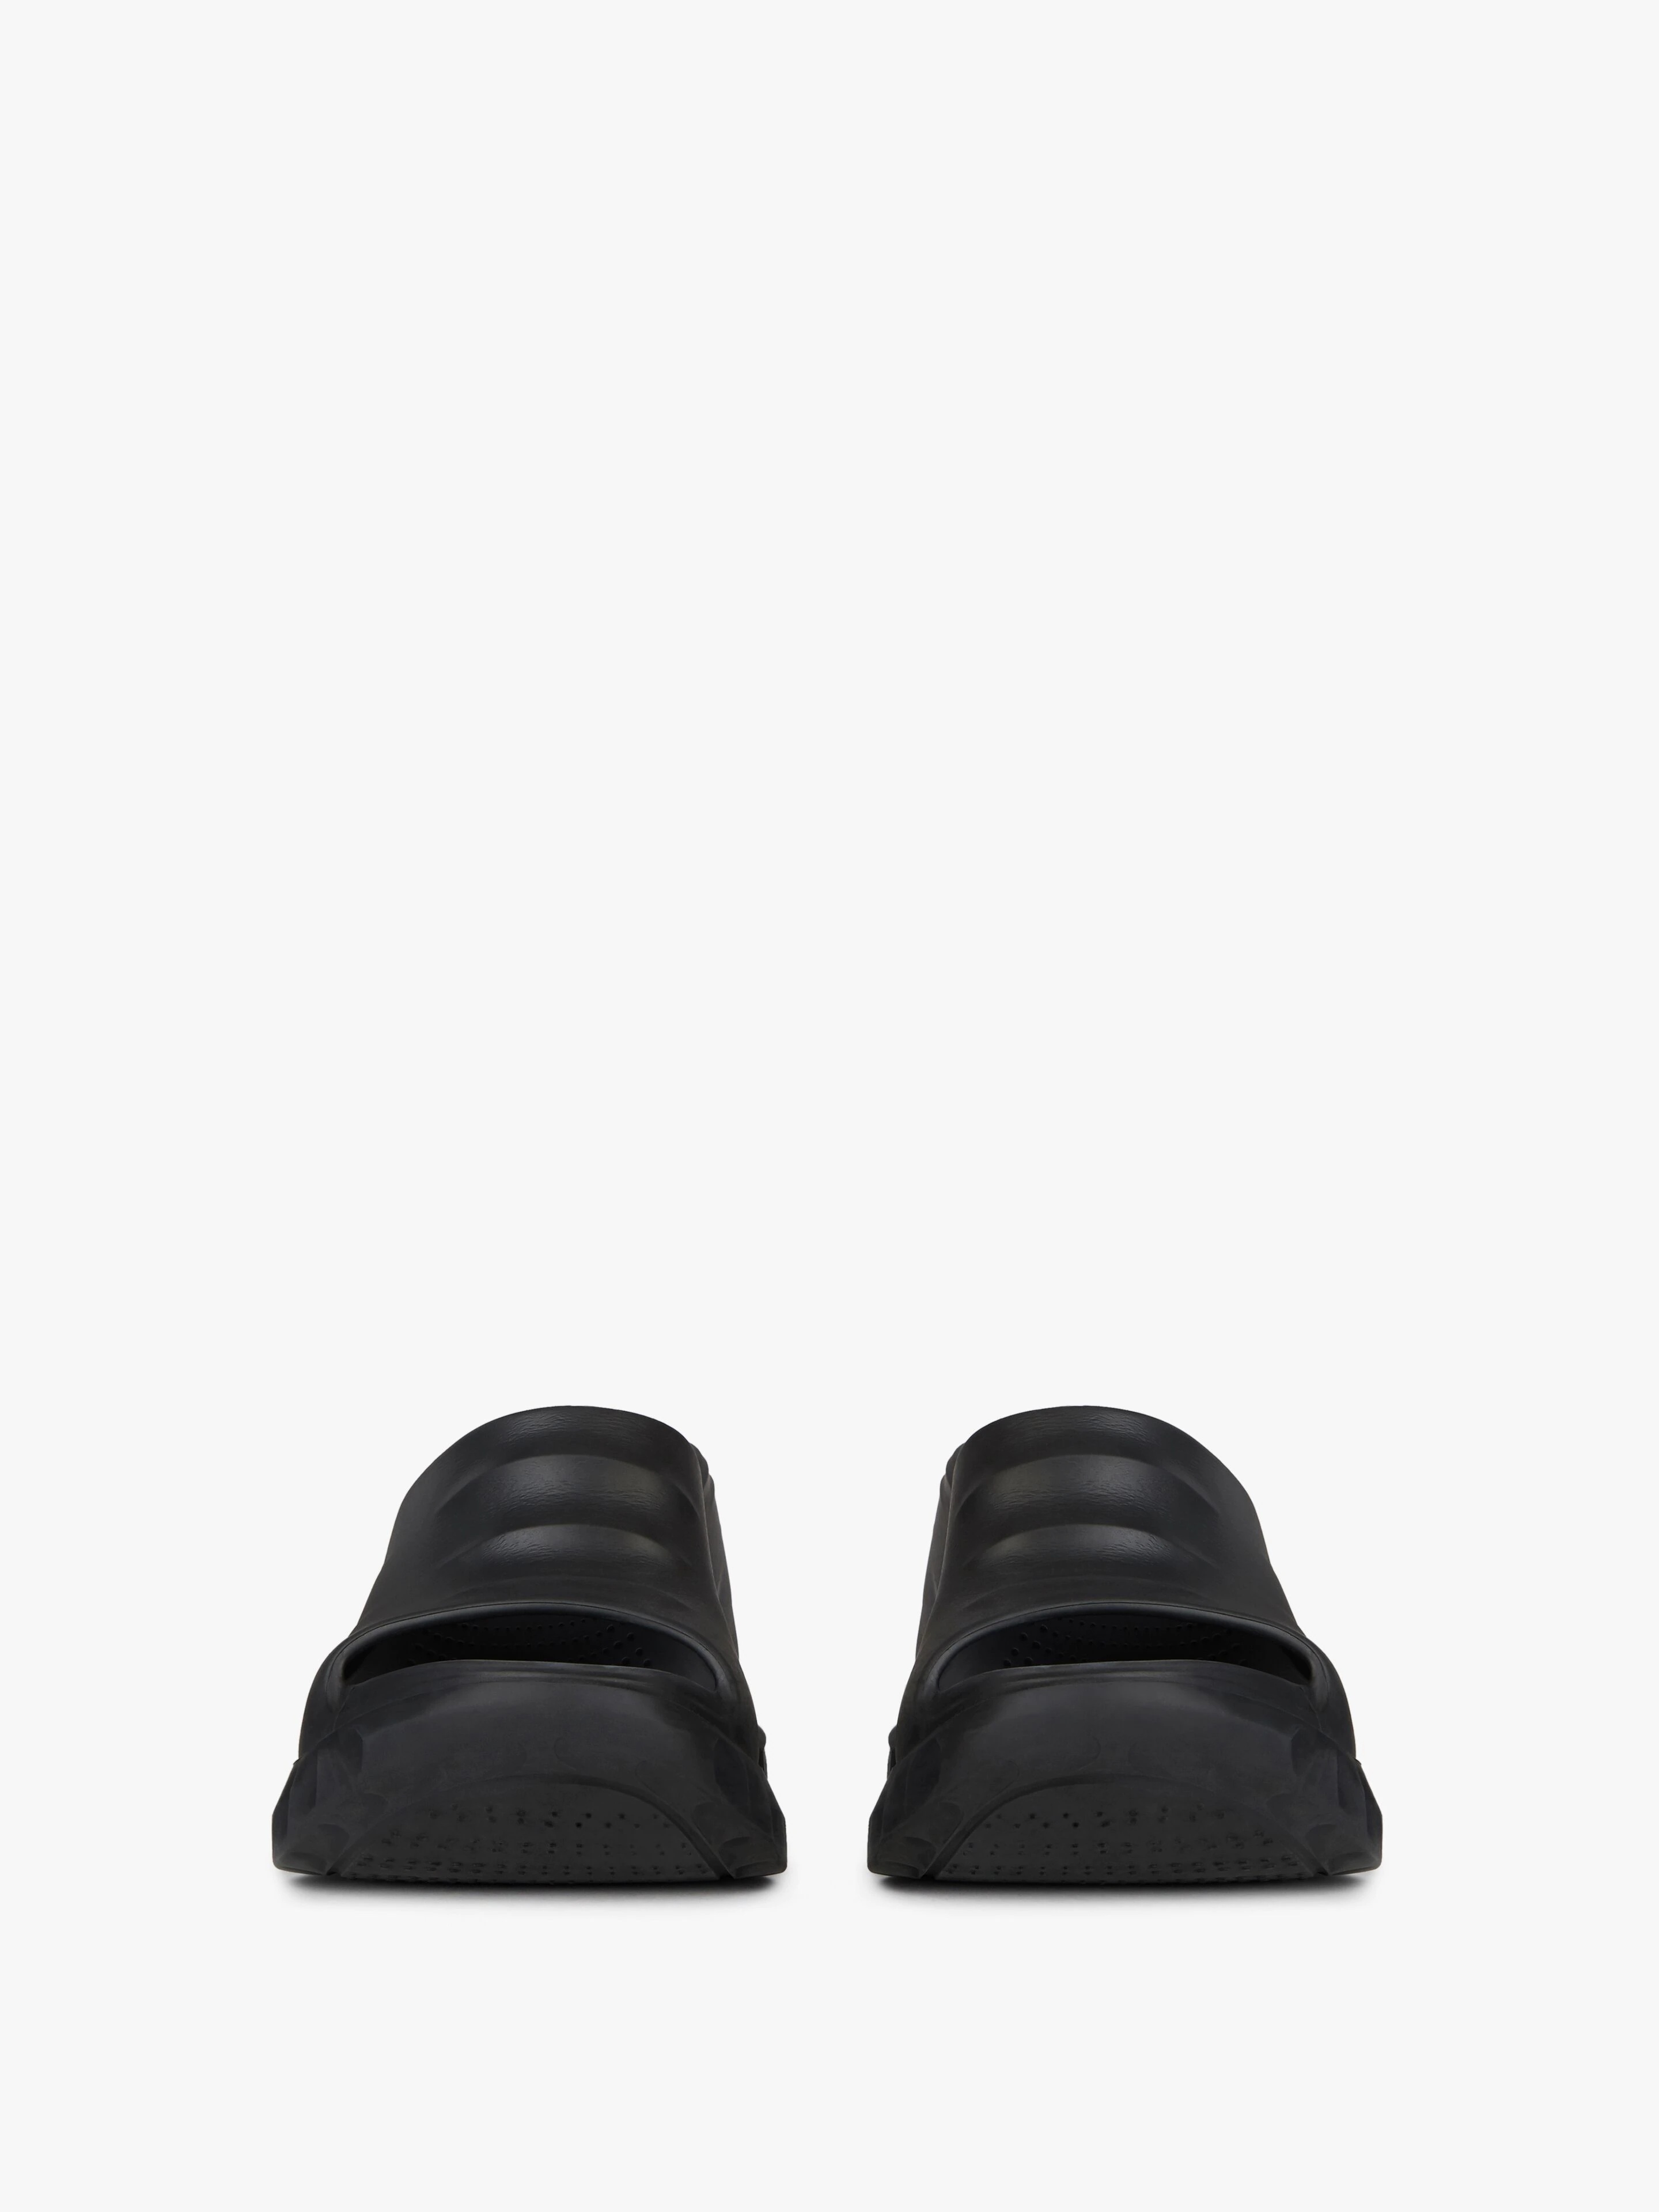 MARSHMALLOW WEDGE SANDALS IN RUBBER - 2